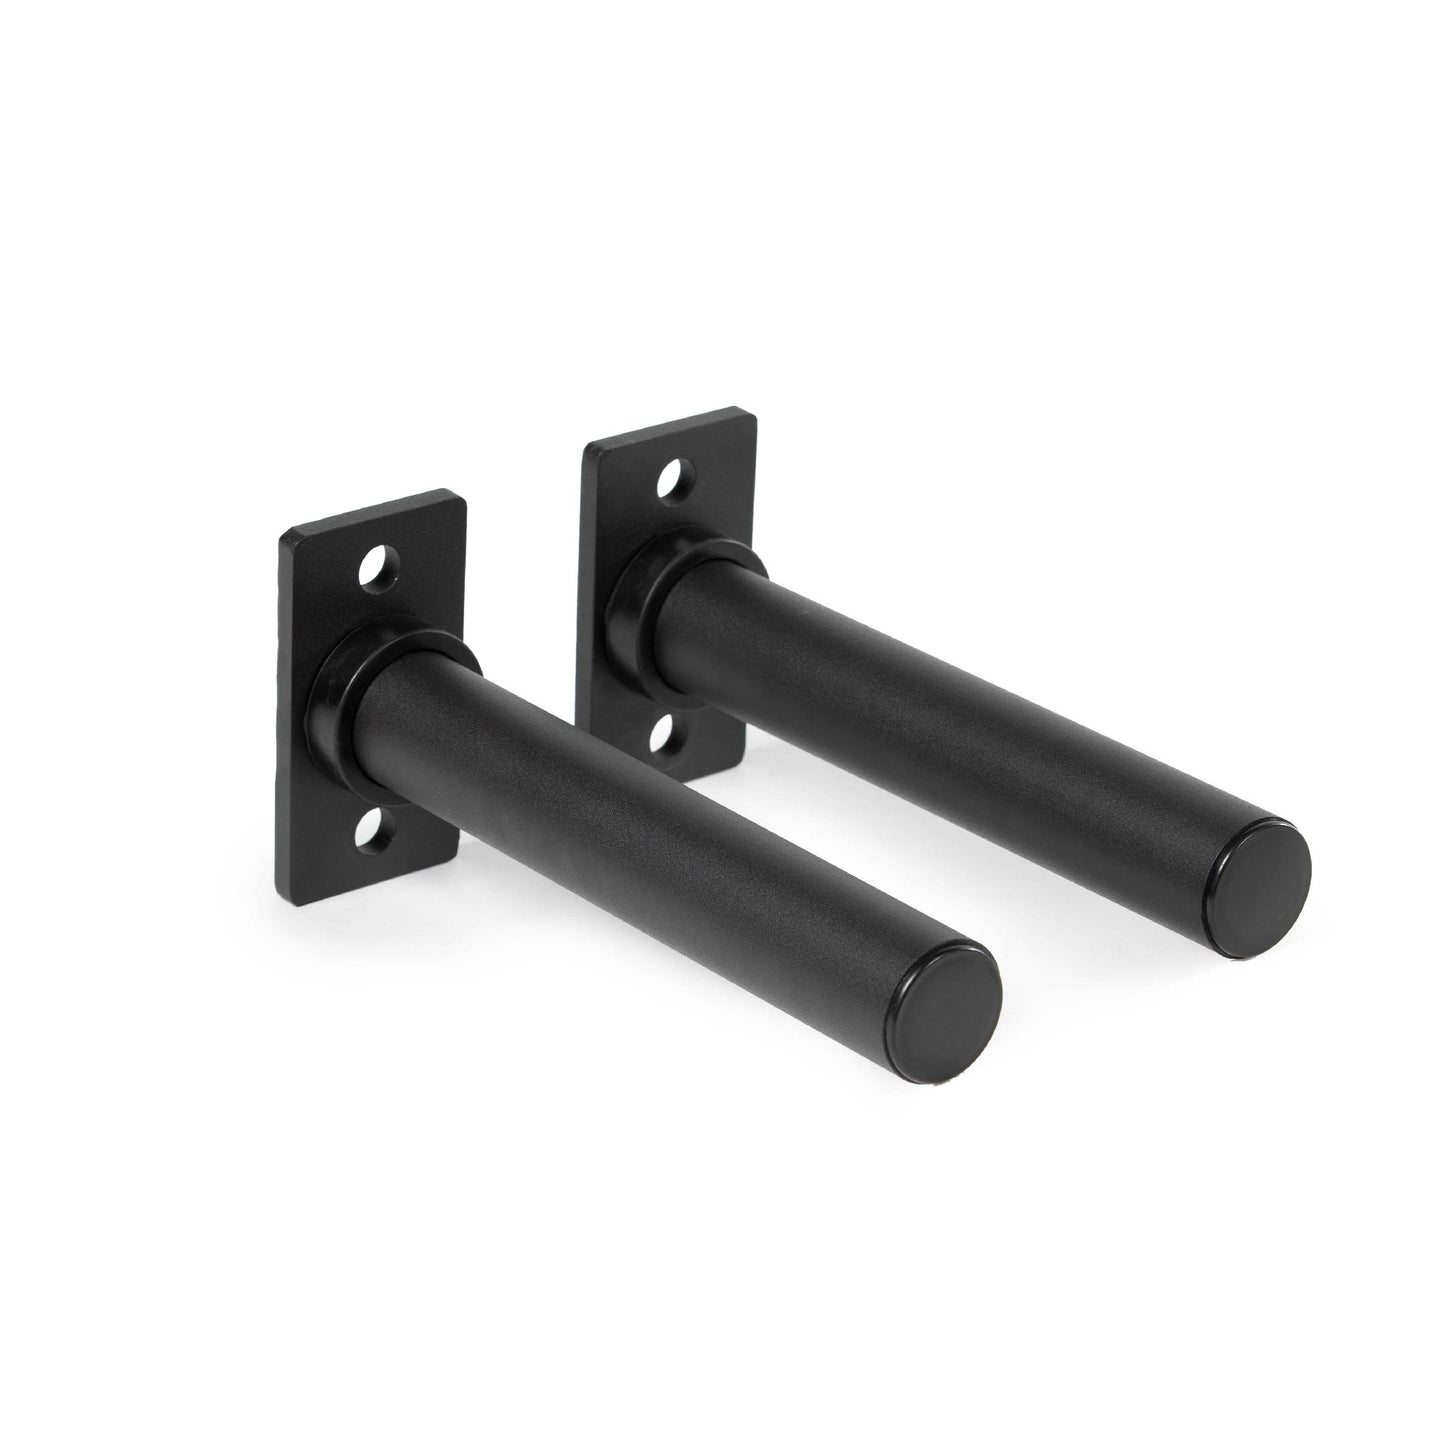 TITAN Series Weight Plate Holders - view 1